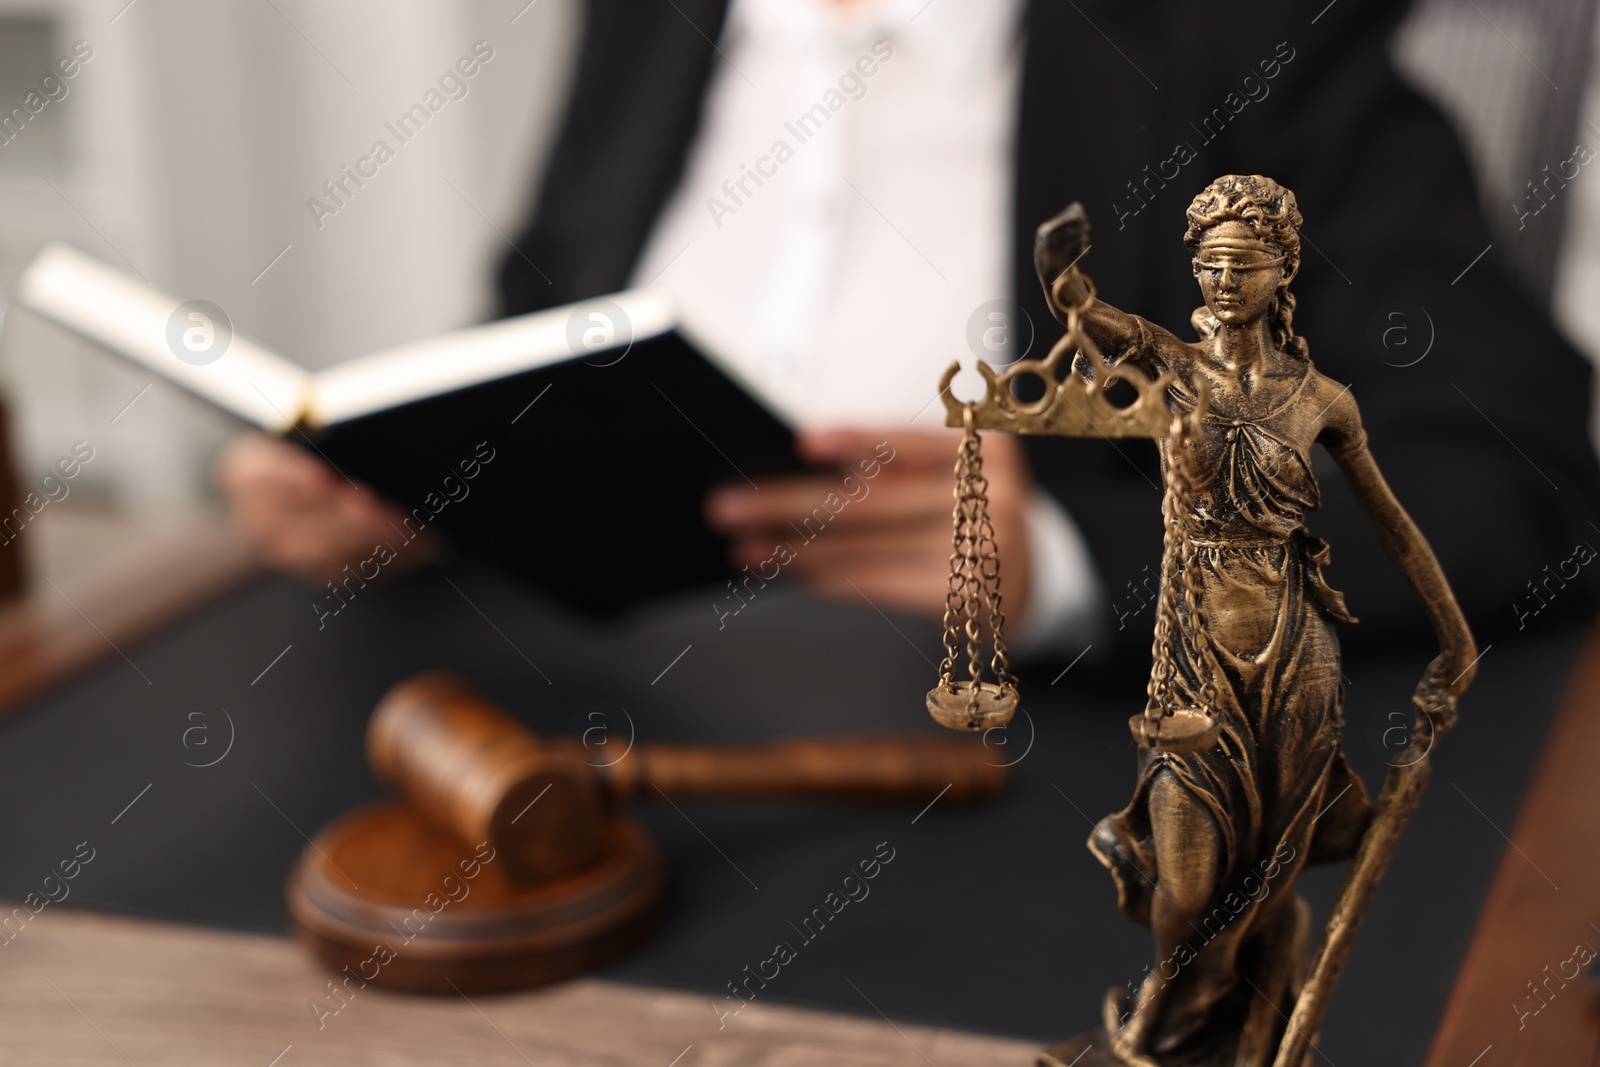 Photo of Notary with notebook at workplace in office, focus on statue of Lady Justice